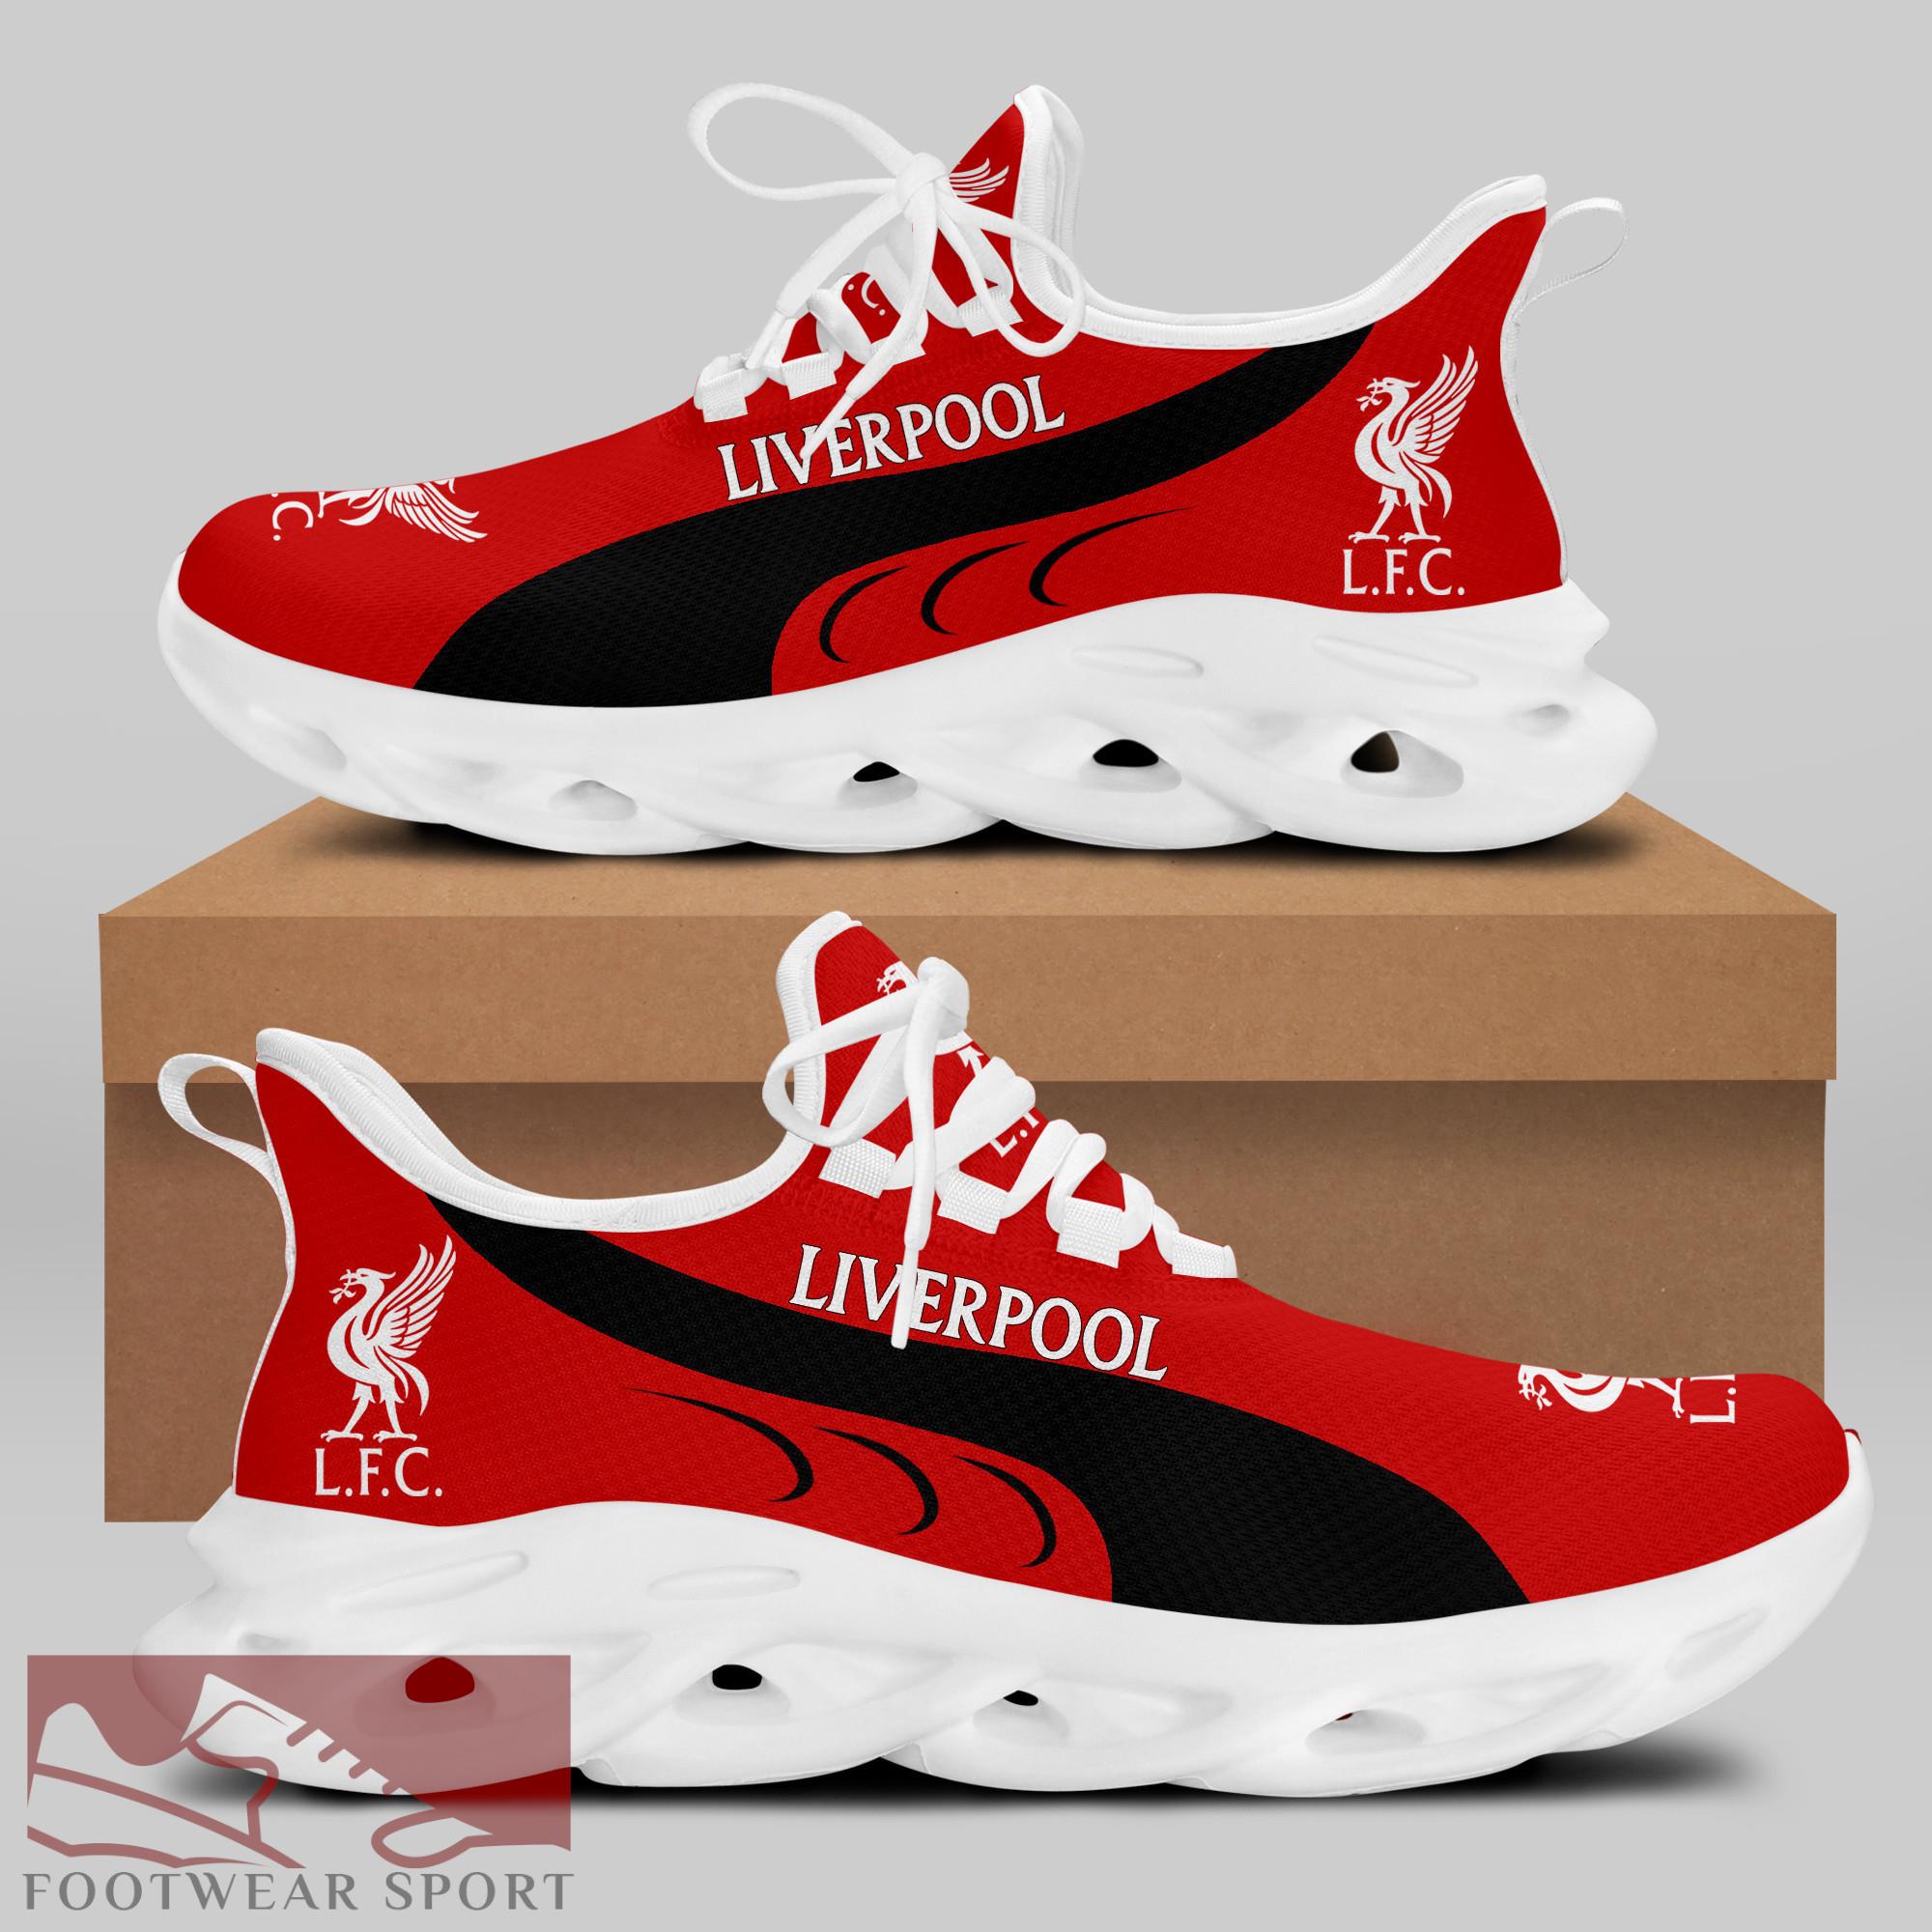 Liverpool FC Fans EPL Chunky Sneakers Aesthetic Max Soul Shoes For Men And Women - Liverpool FC Chunky Sneakers White Black Max Soul Shoes For Men And Women Photo 2